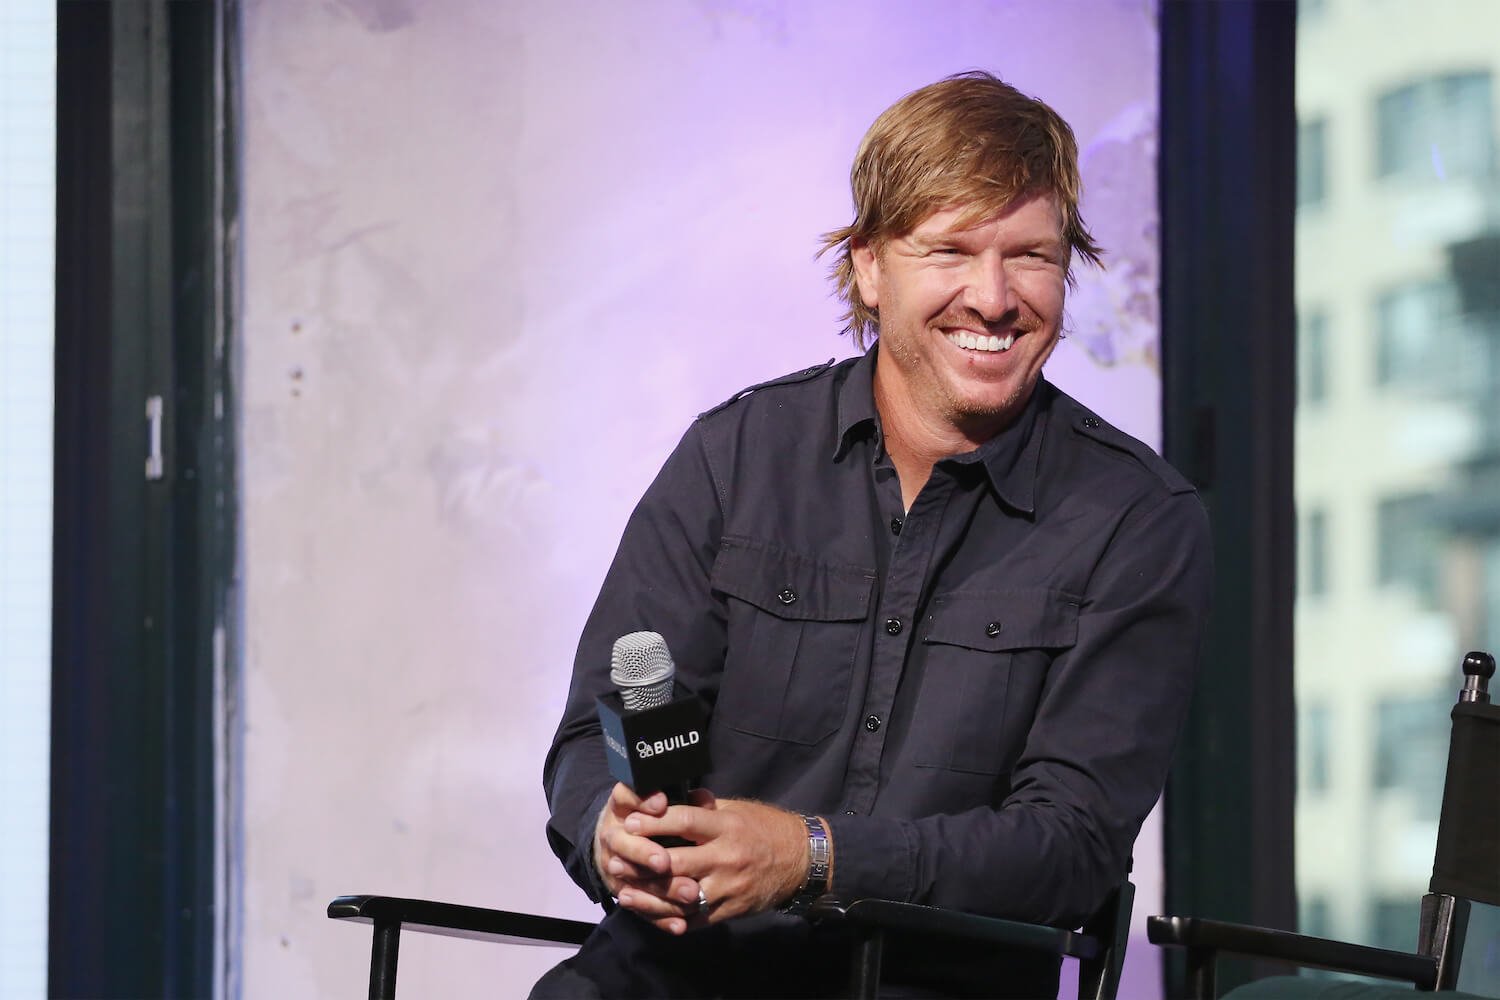 Chip Gaines, husband of Joanna Gaines, laughing with a microphone in his hand